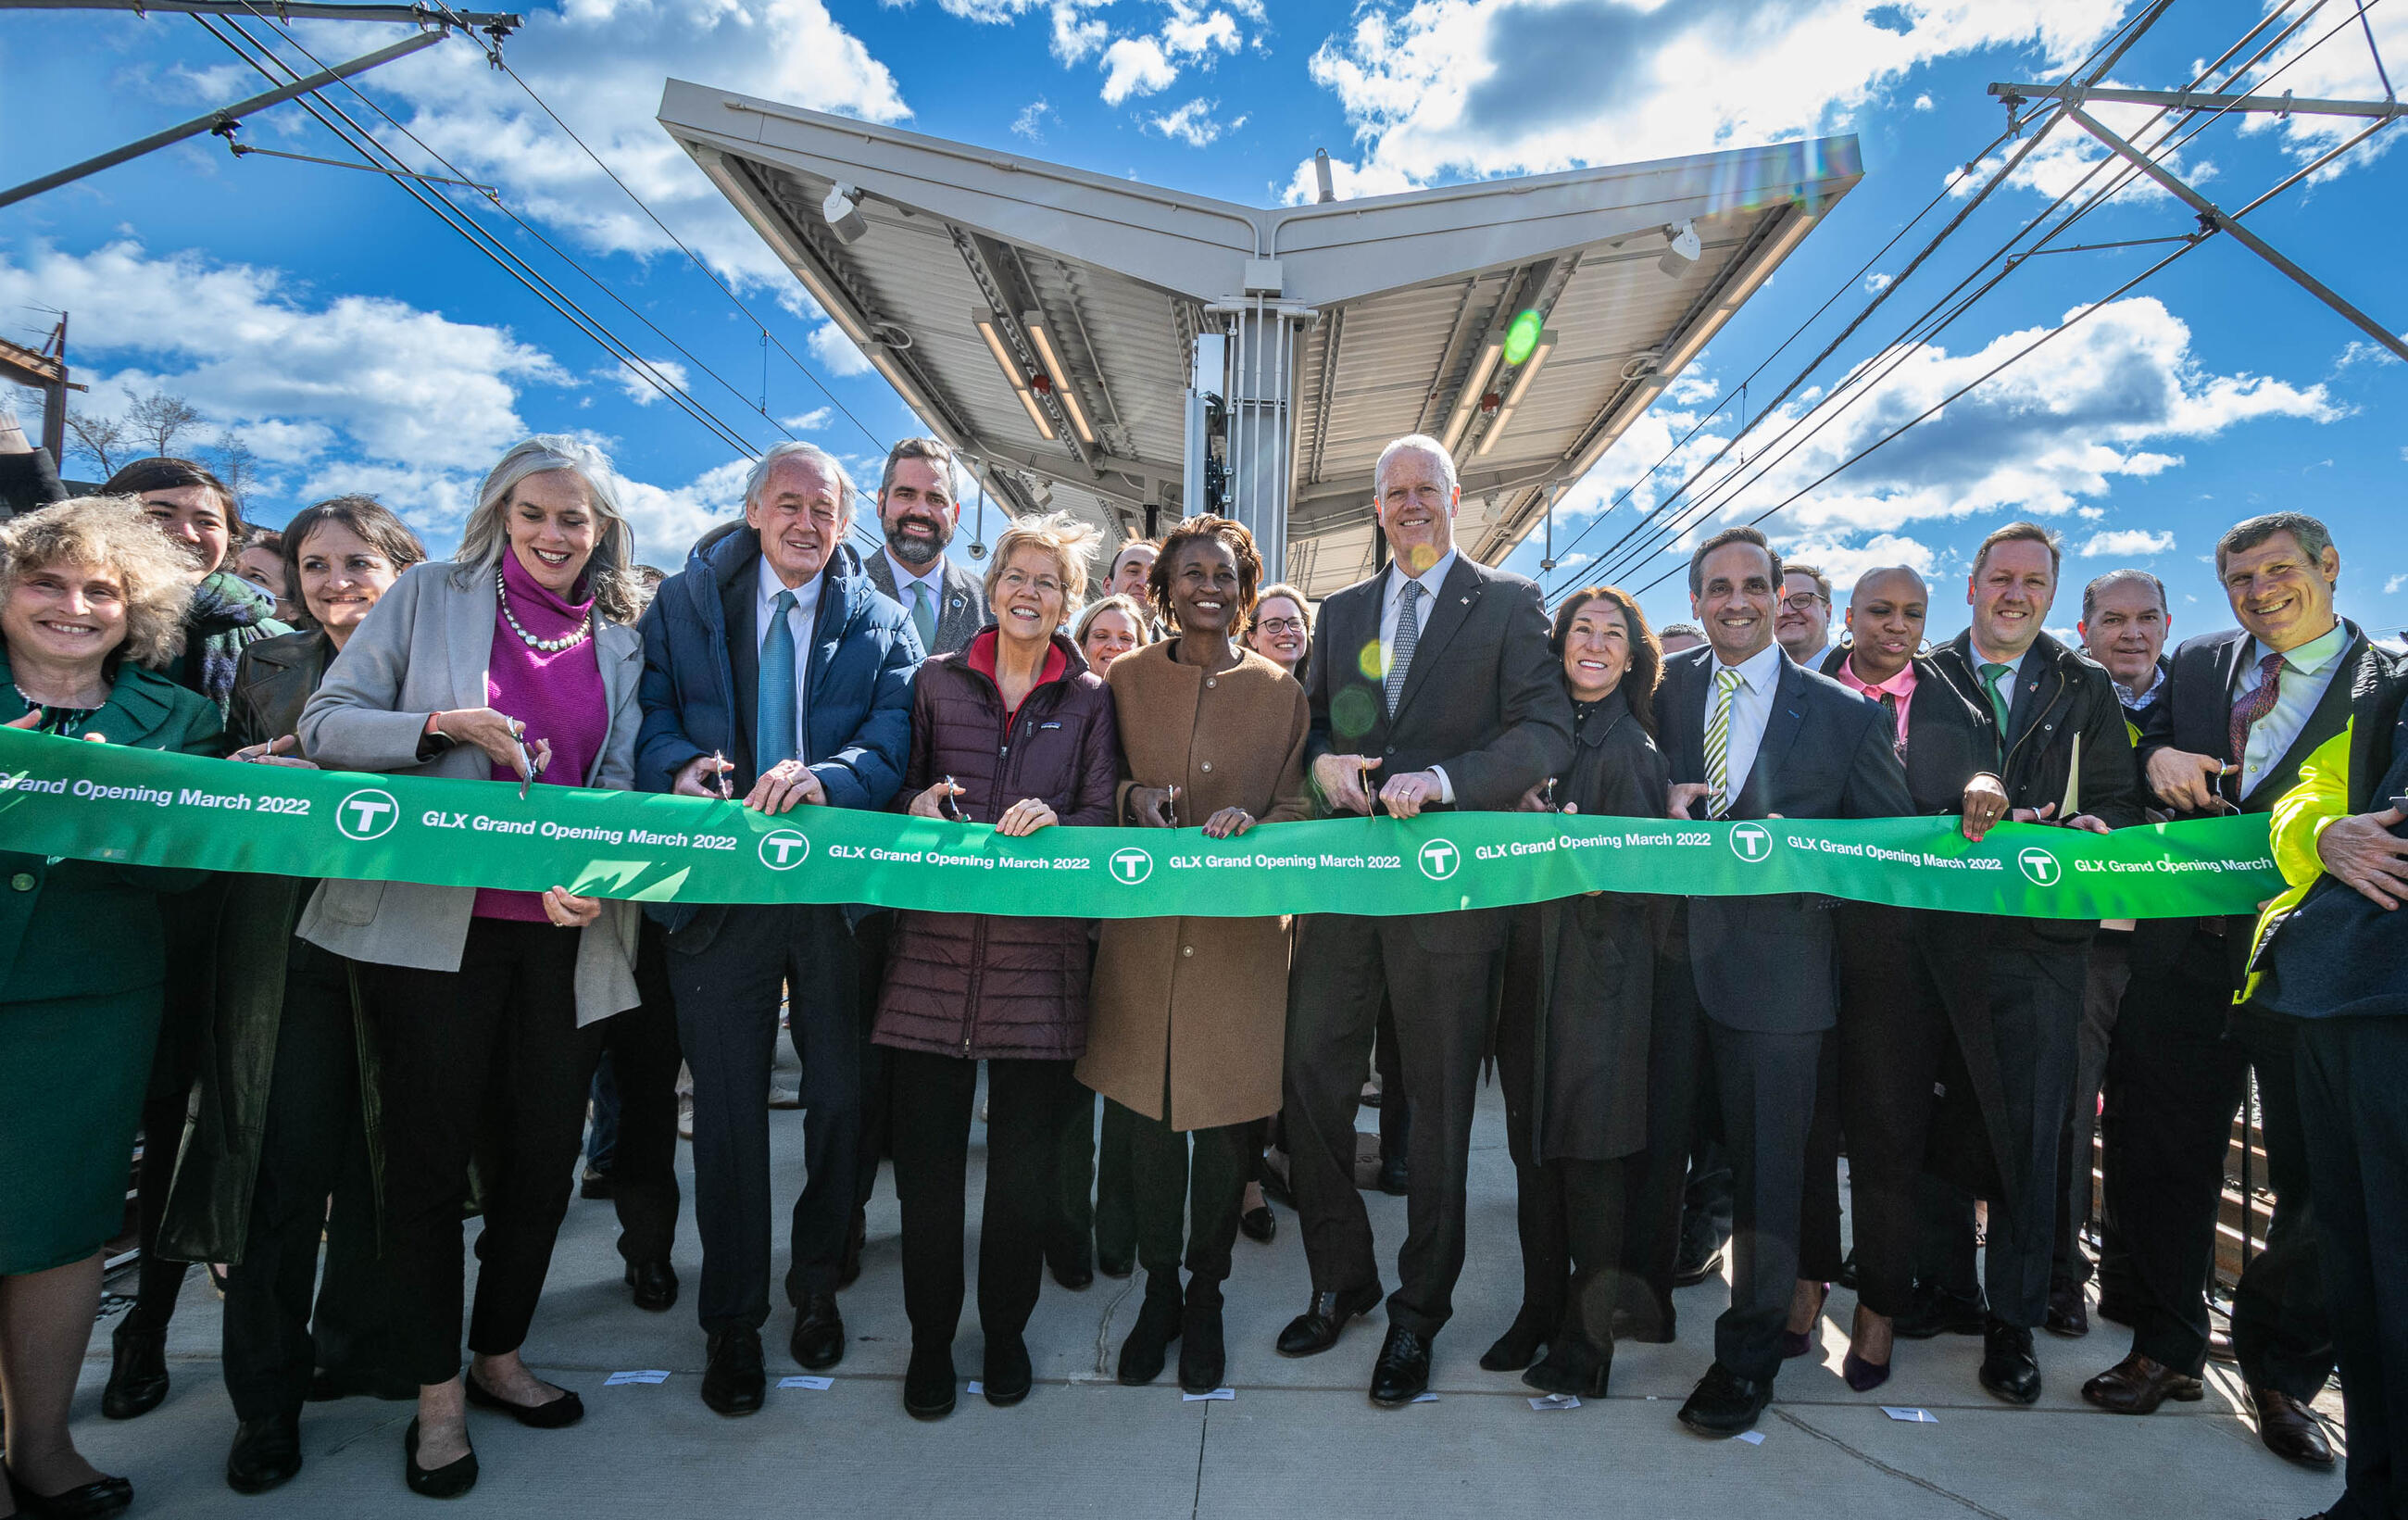 Governor Baker, Transportation Secretary and CEO Tesler, and MBTA General Manager Poftak joined federal, state, and local elected leaders as well as community partners to celebrate the opening of the first branch of the Green Line Extension.